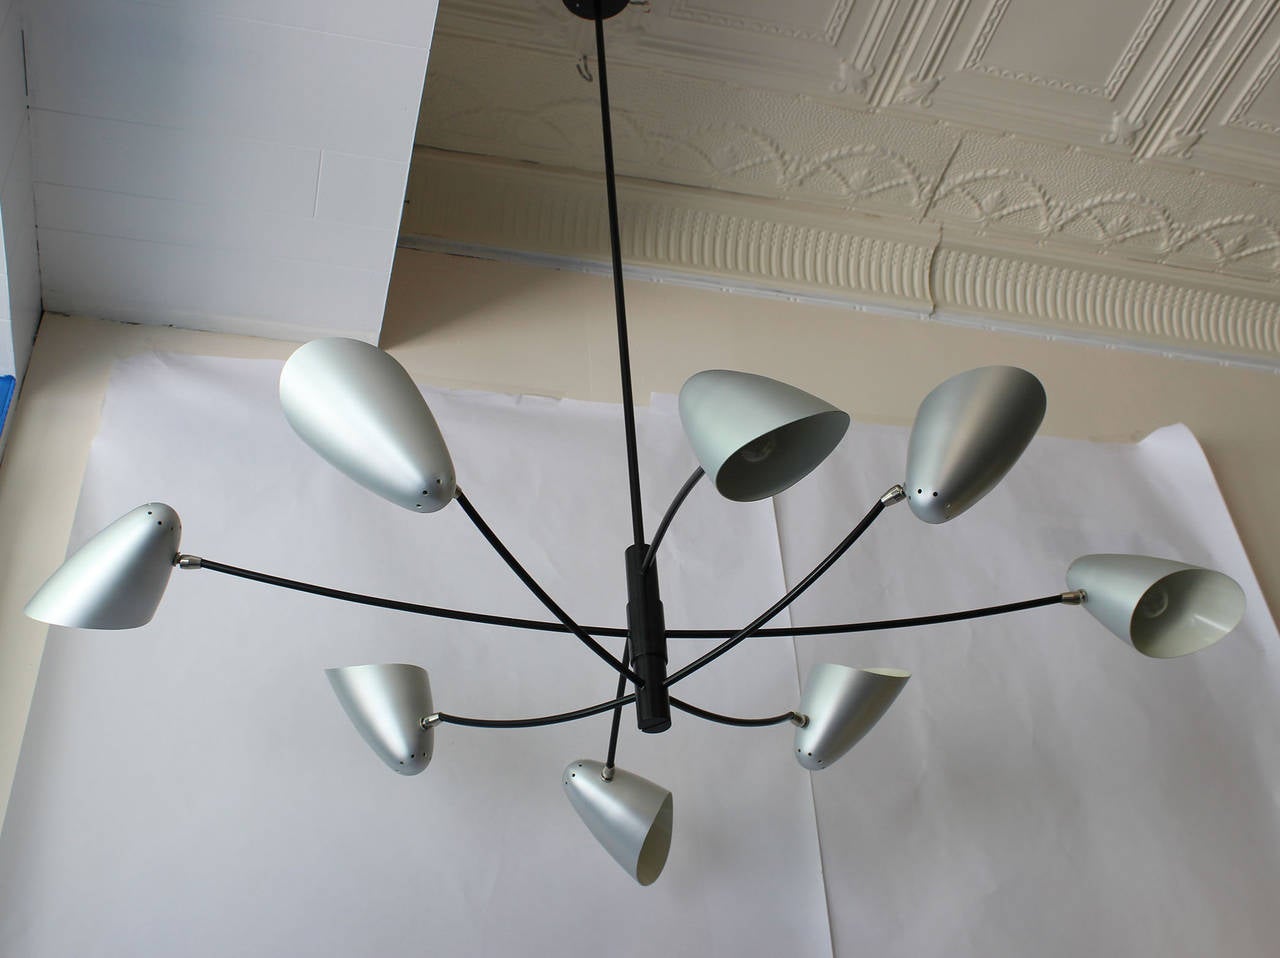 Gorgeous Italian modern-influenced chandelier with brushed metal shades and enameled metal arms and stem, designed by David Weeks.

Local -- Hamptons complementary delivery.